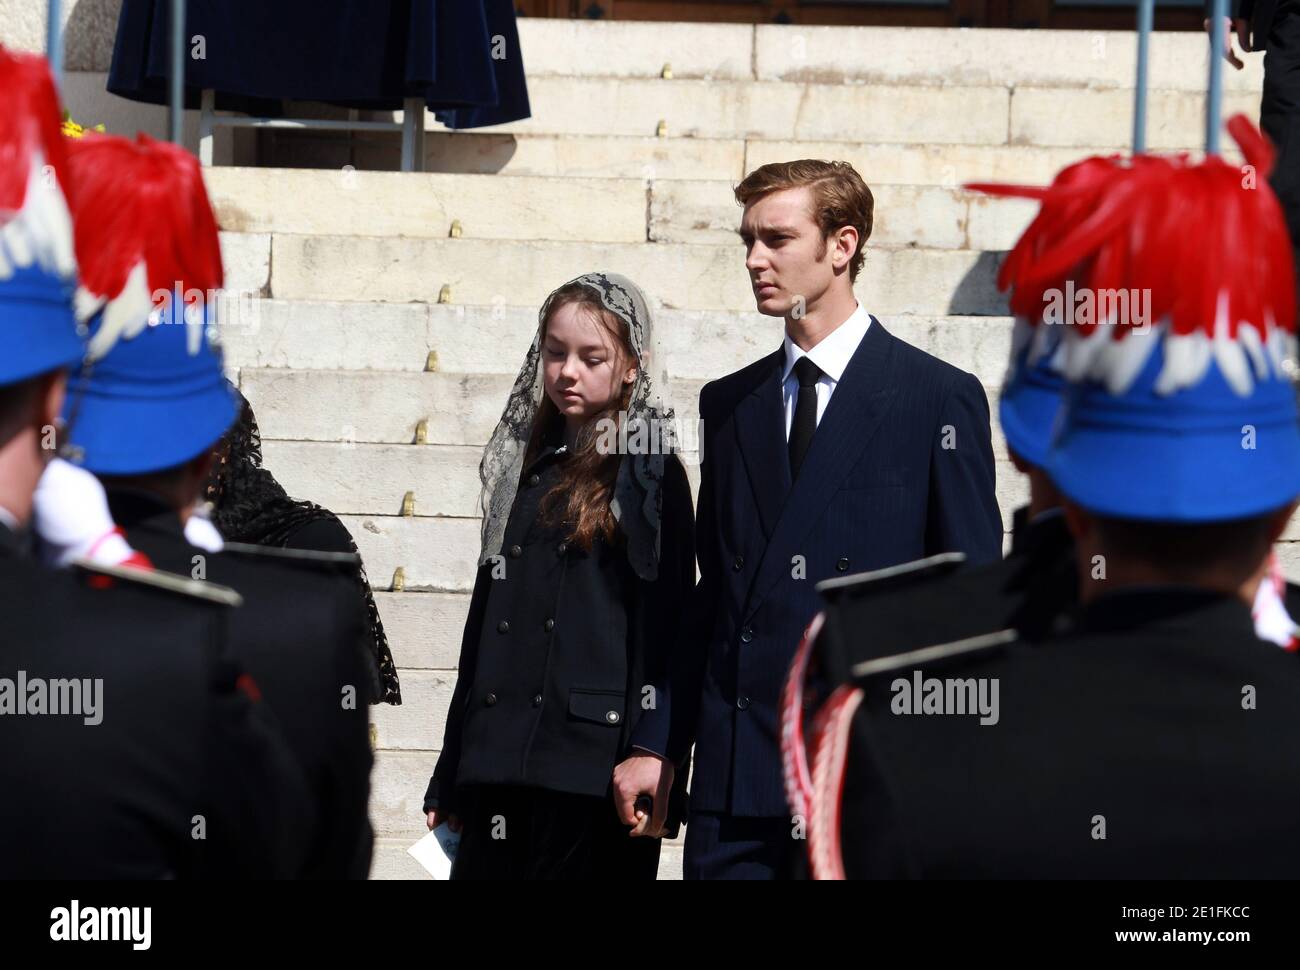 Pierre Casiraghi and Princess Alexandra of Hanover after the funeral ceremony of Princess Antoinette of Monaco, at Notre-Dame-Immaculee cathedral in Monaco, Principality of Monaco on March 24, 2011. Photo by Franz Chavaroche/Pool/ABACAPRESS.COM Stock Photo